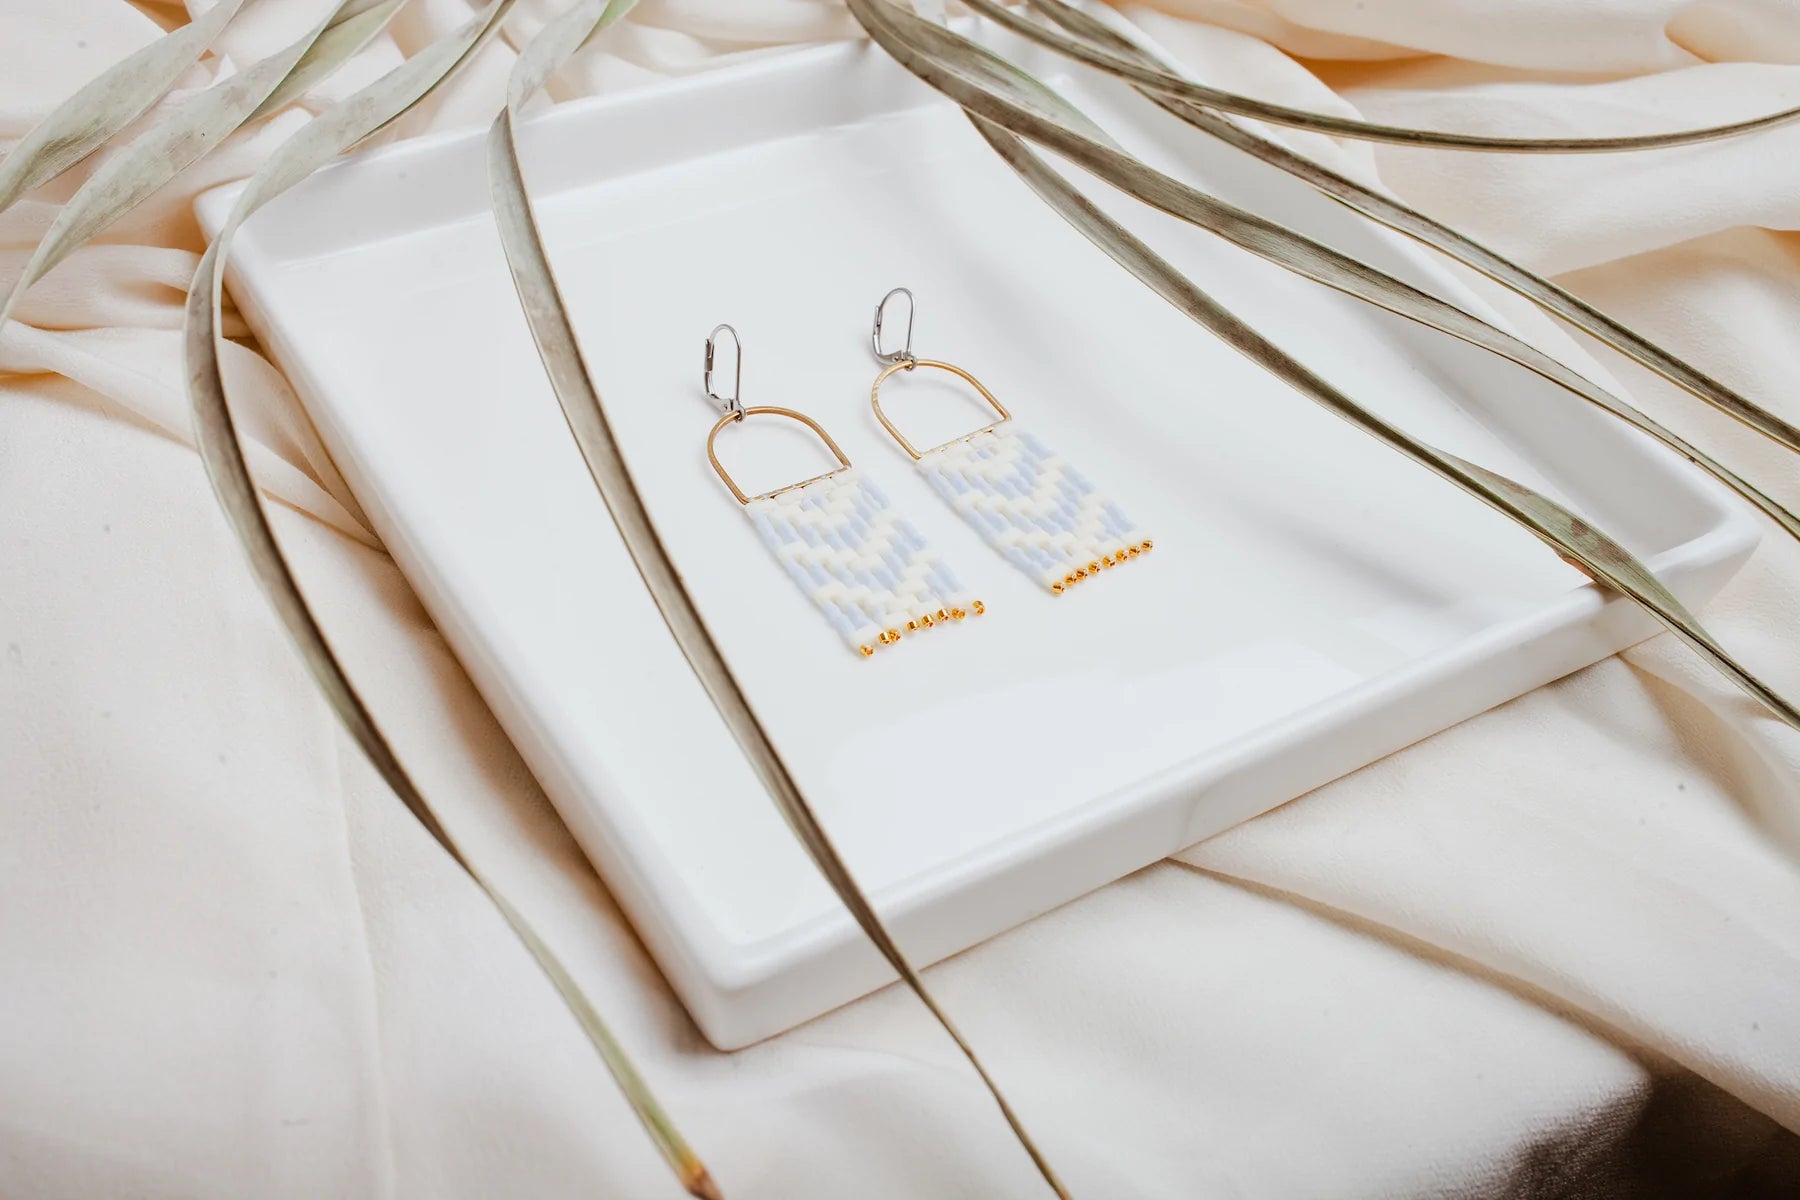 A pair of earrings made from blue, white and gold beads on a white stand.